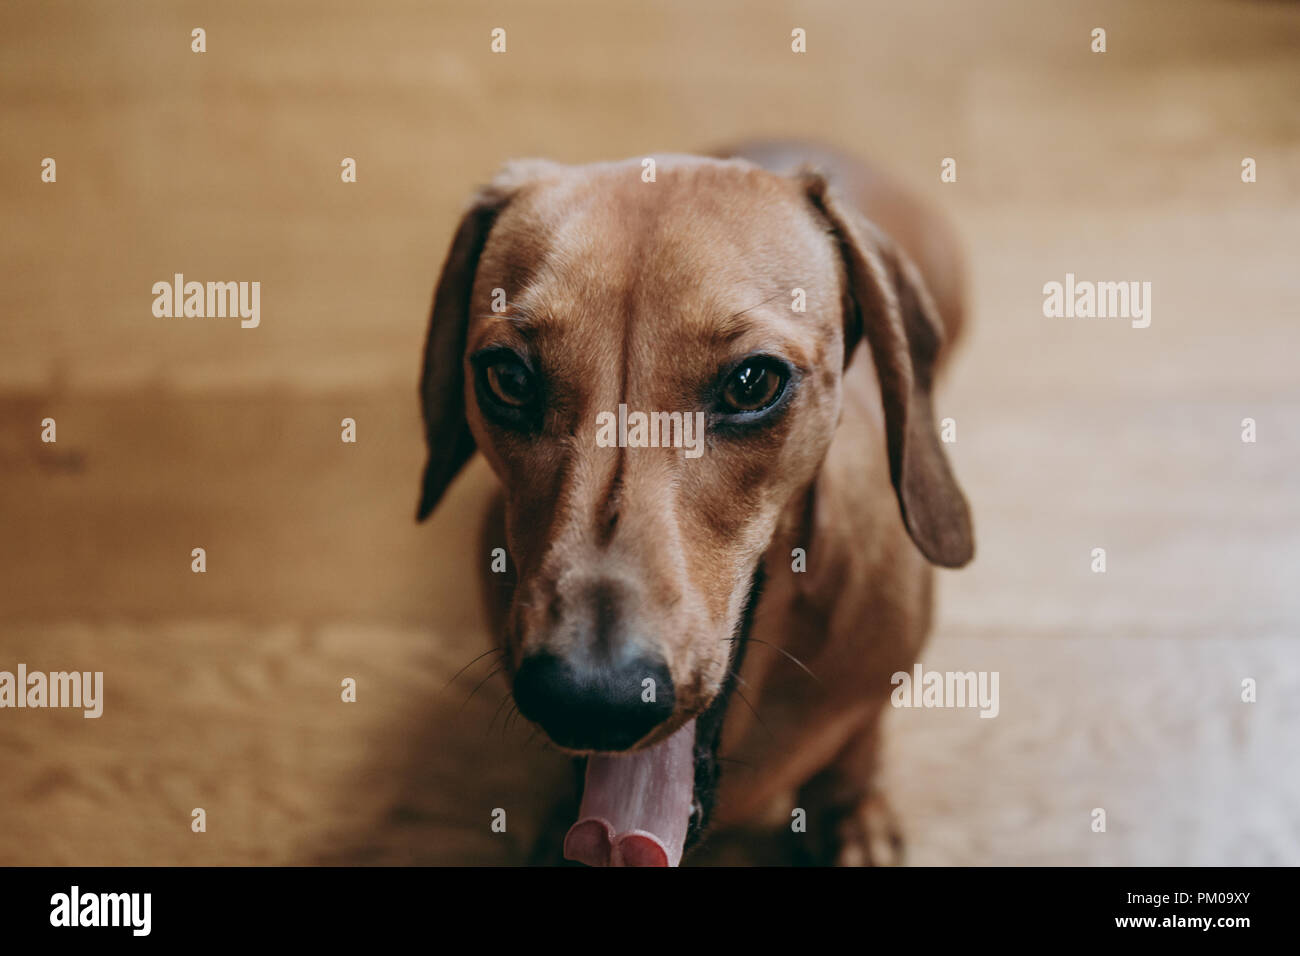 Portrait of a yawning brown smooth hair dachshund, sitting on the wooden floor, view from above. Stock Photo